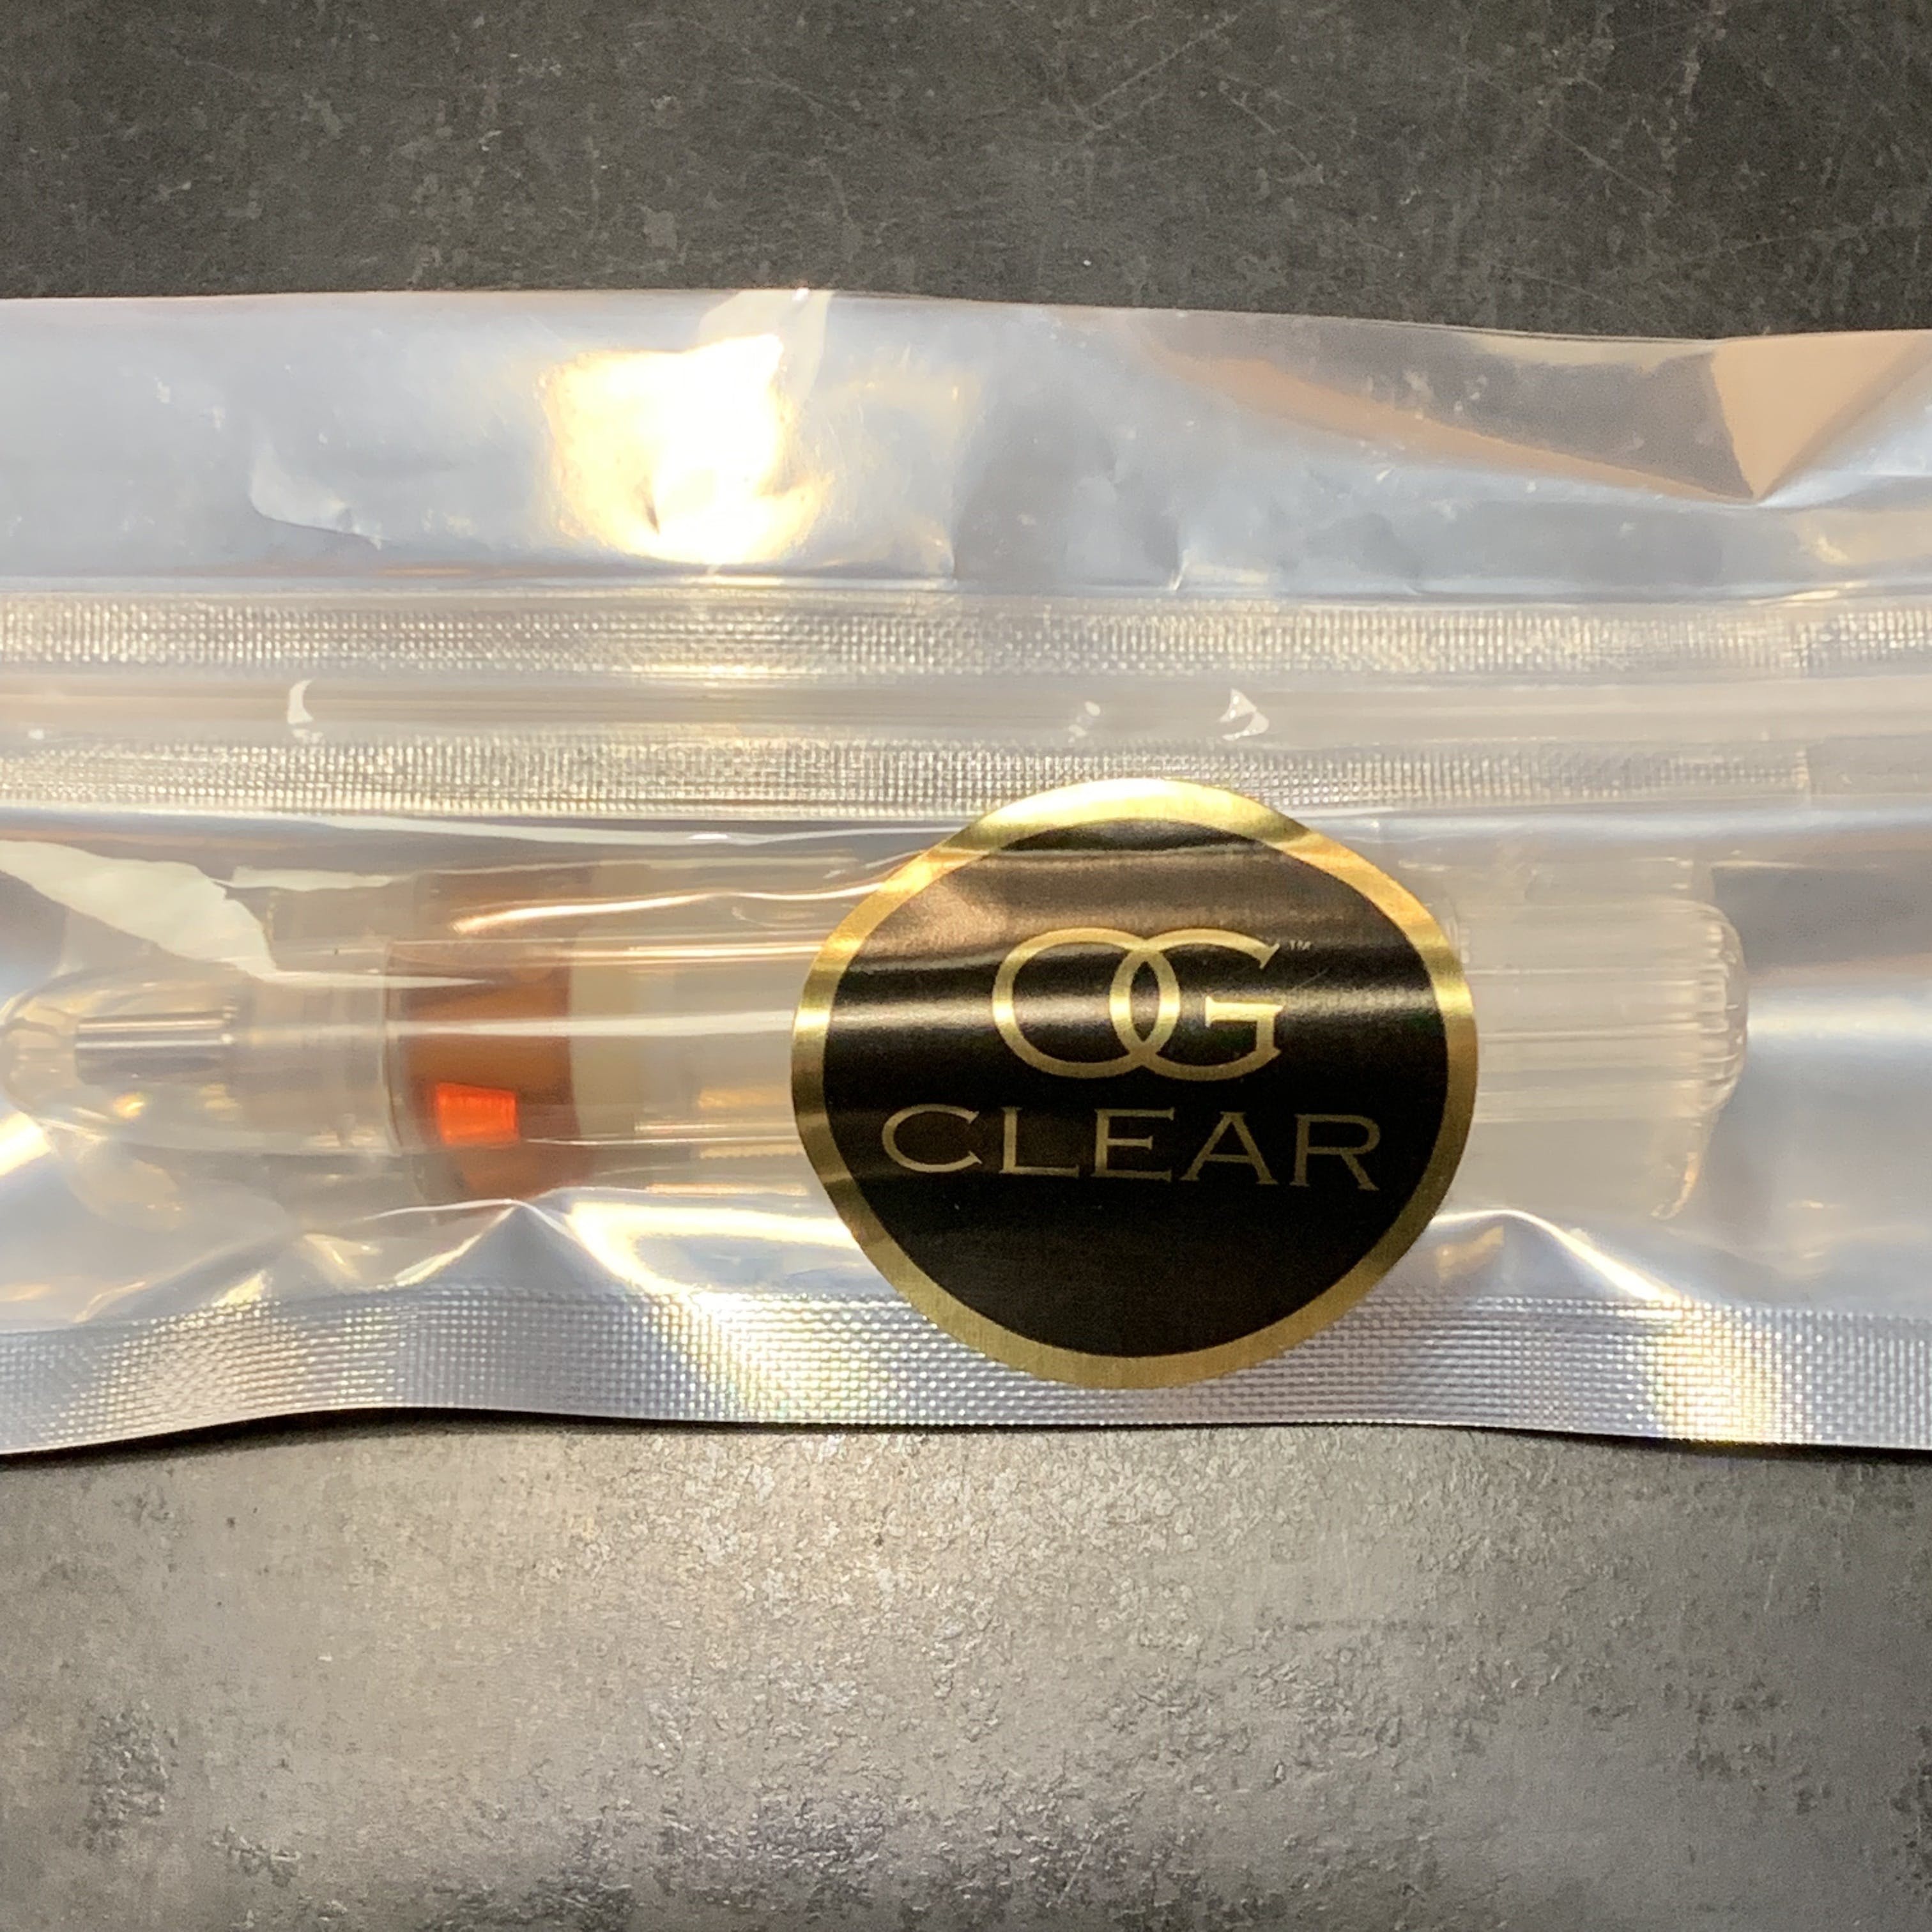 concentrate-og-clear-dab-chemdawg-5g